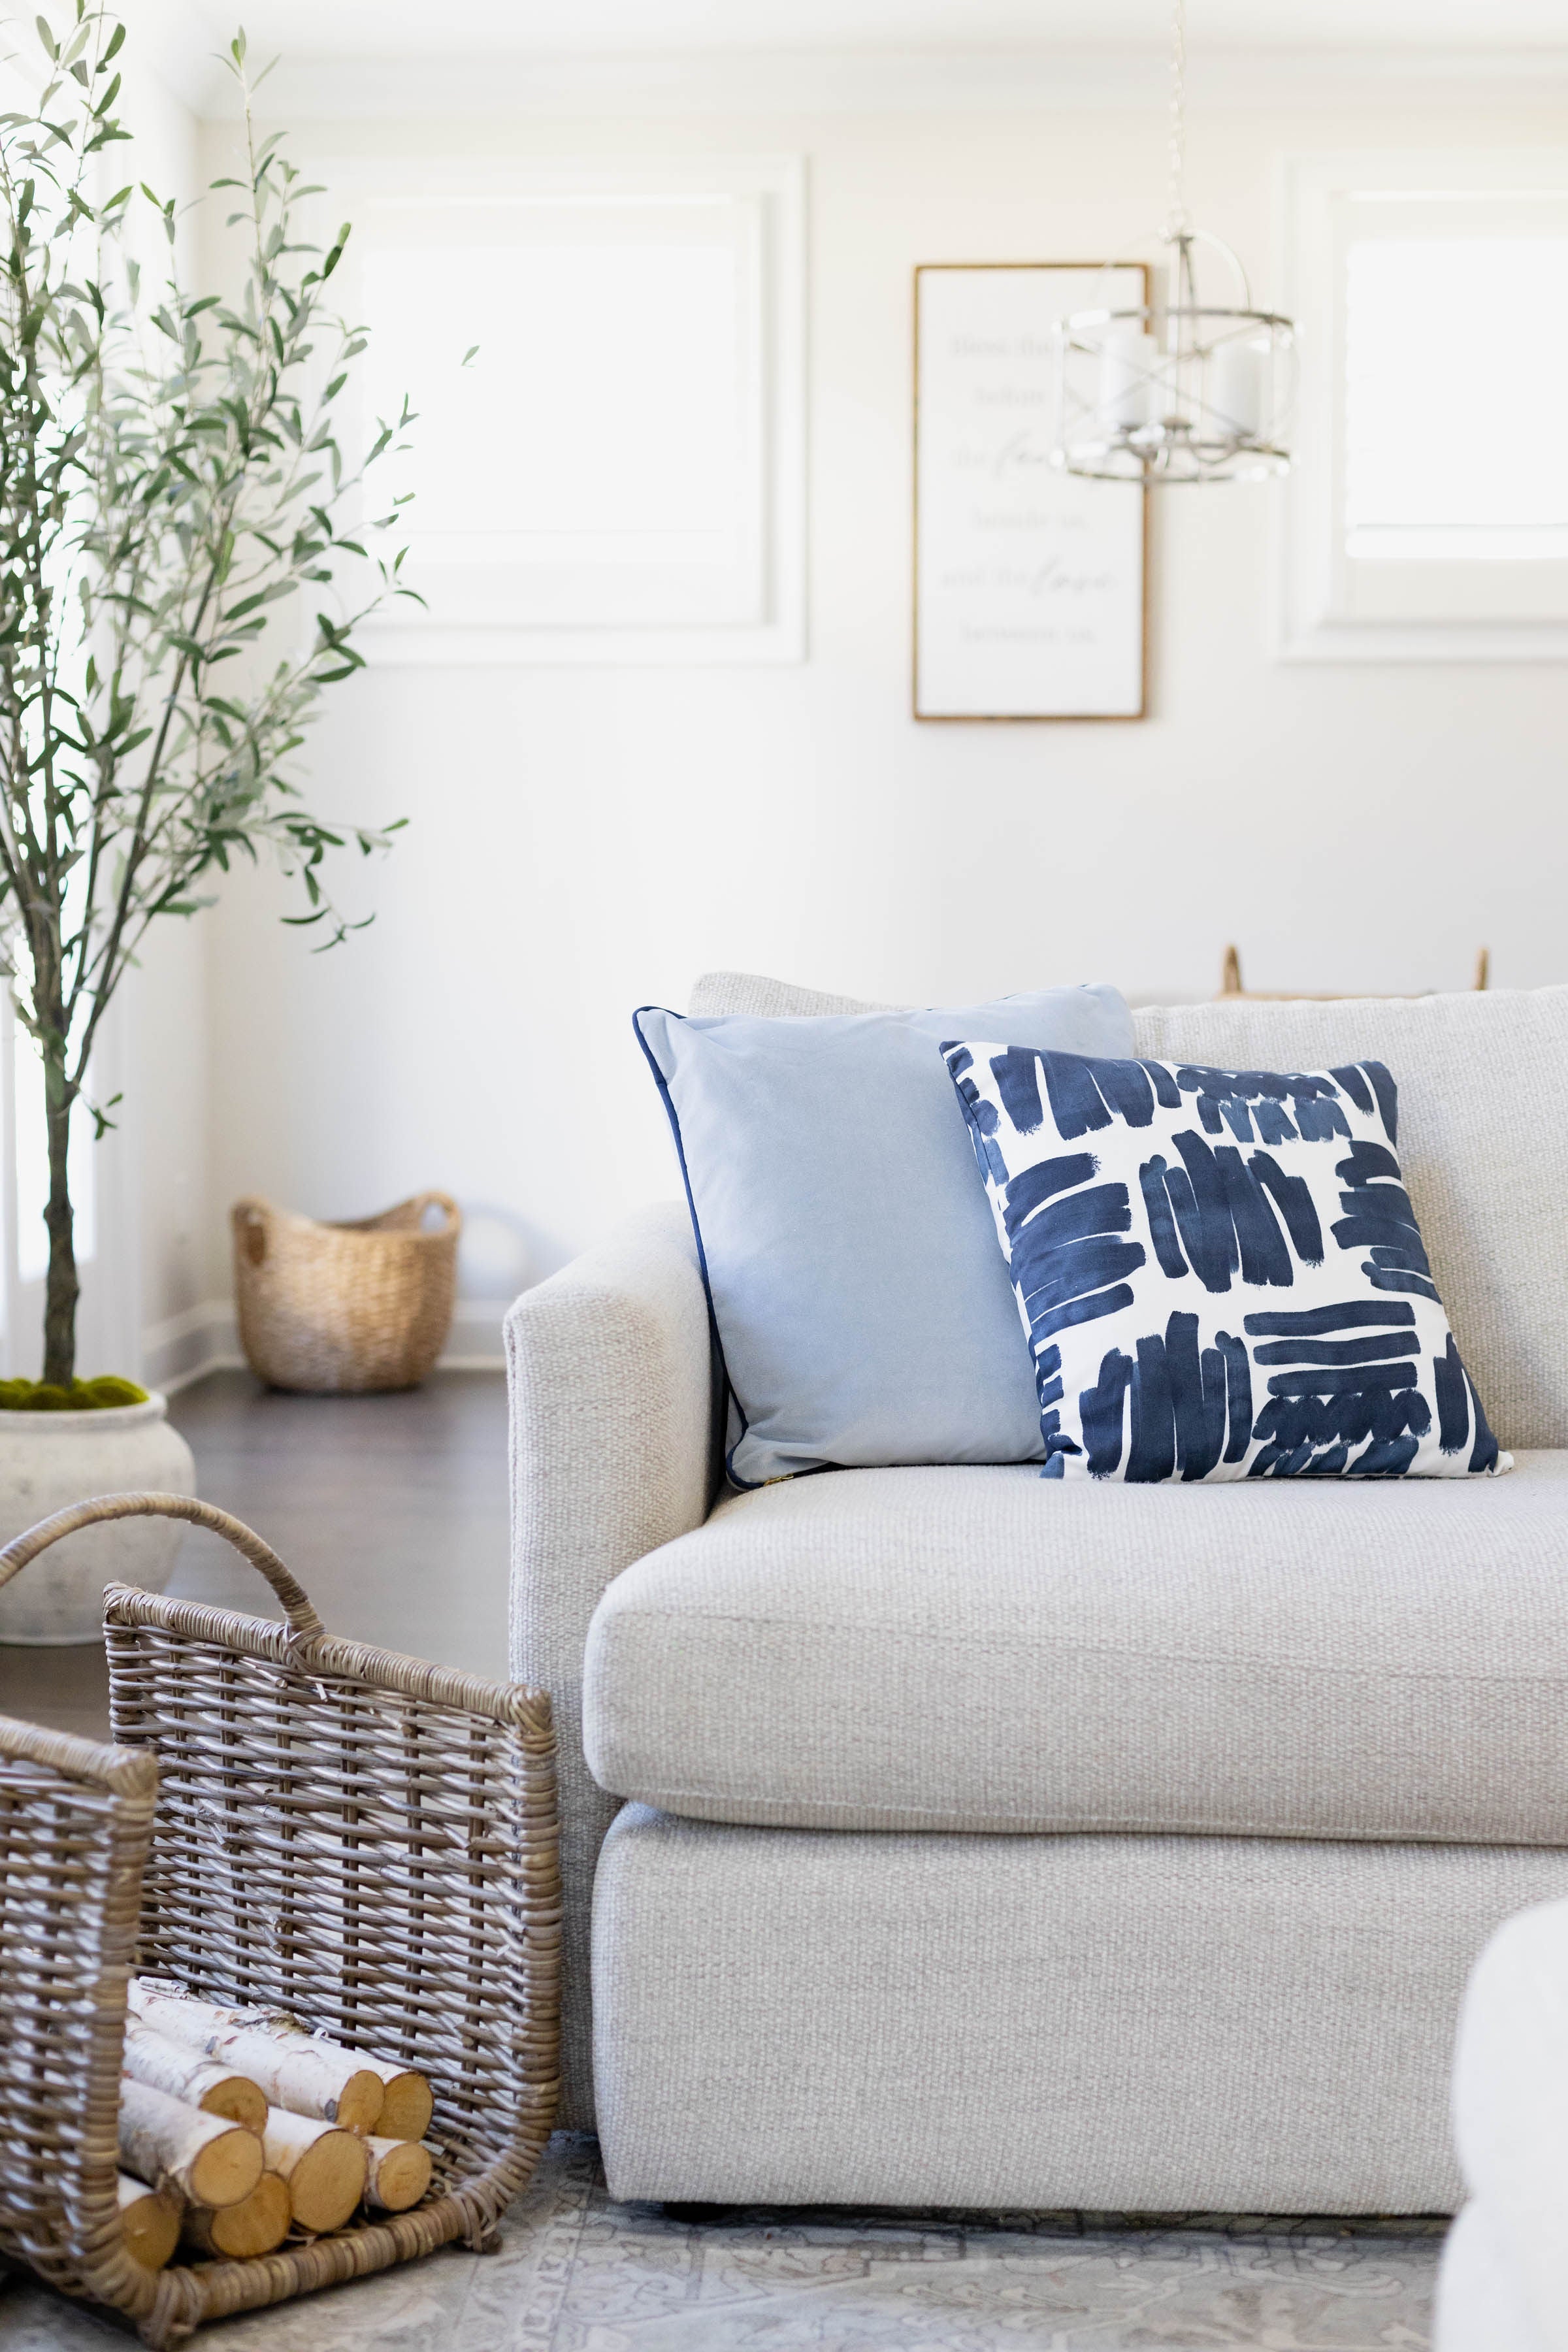 Navy Brushstokes Pattern pillow styled with a sky velvet pillow on a white couch next to wooden logs in a rattan basket